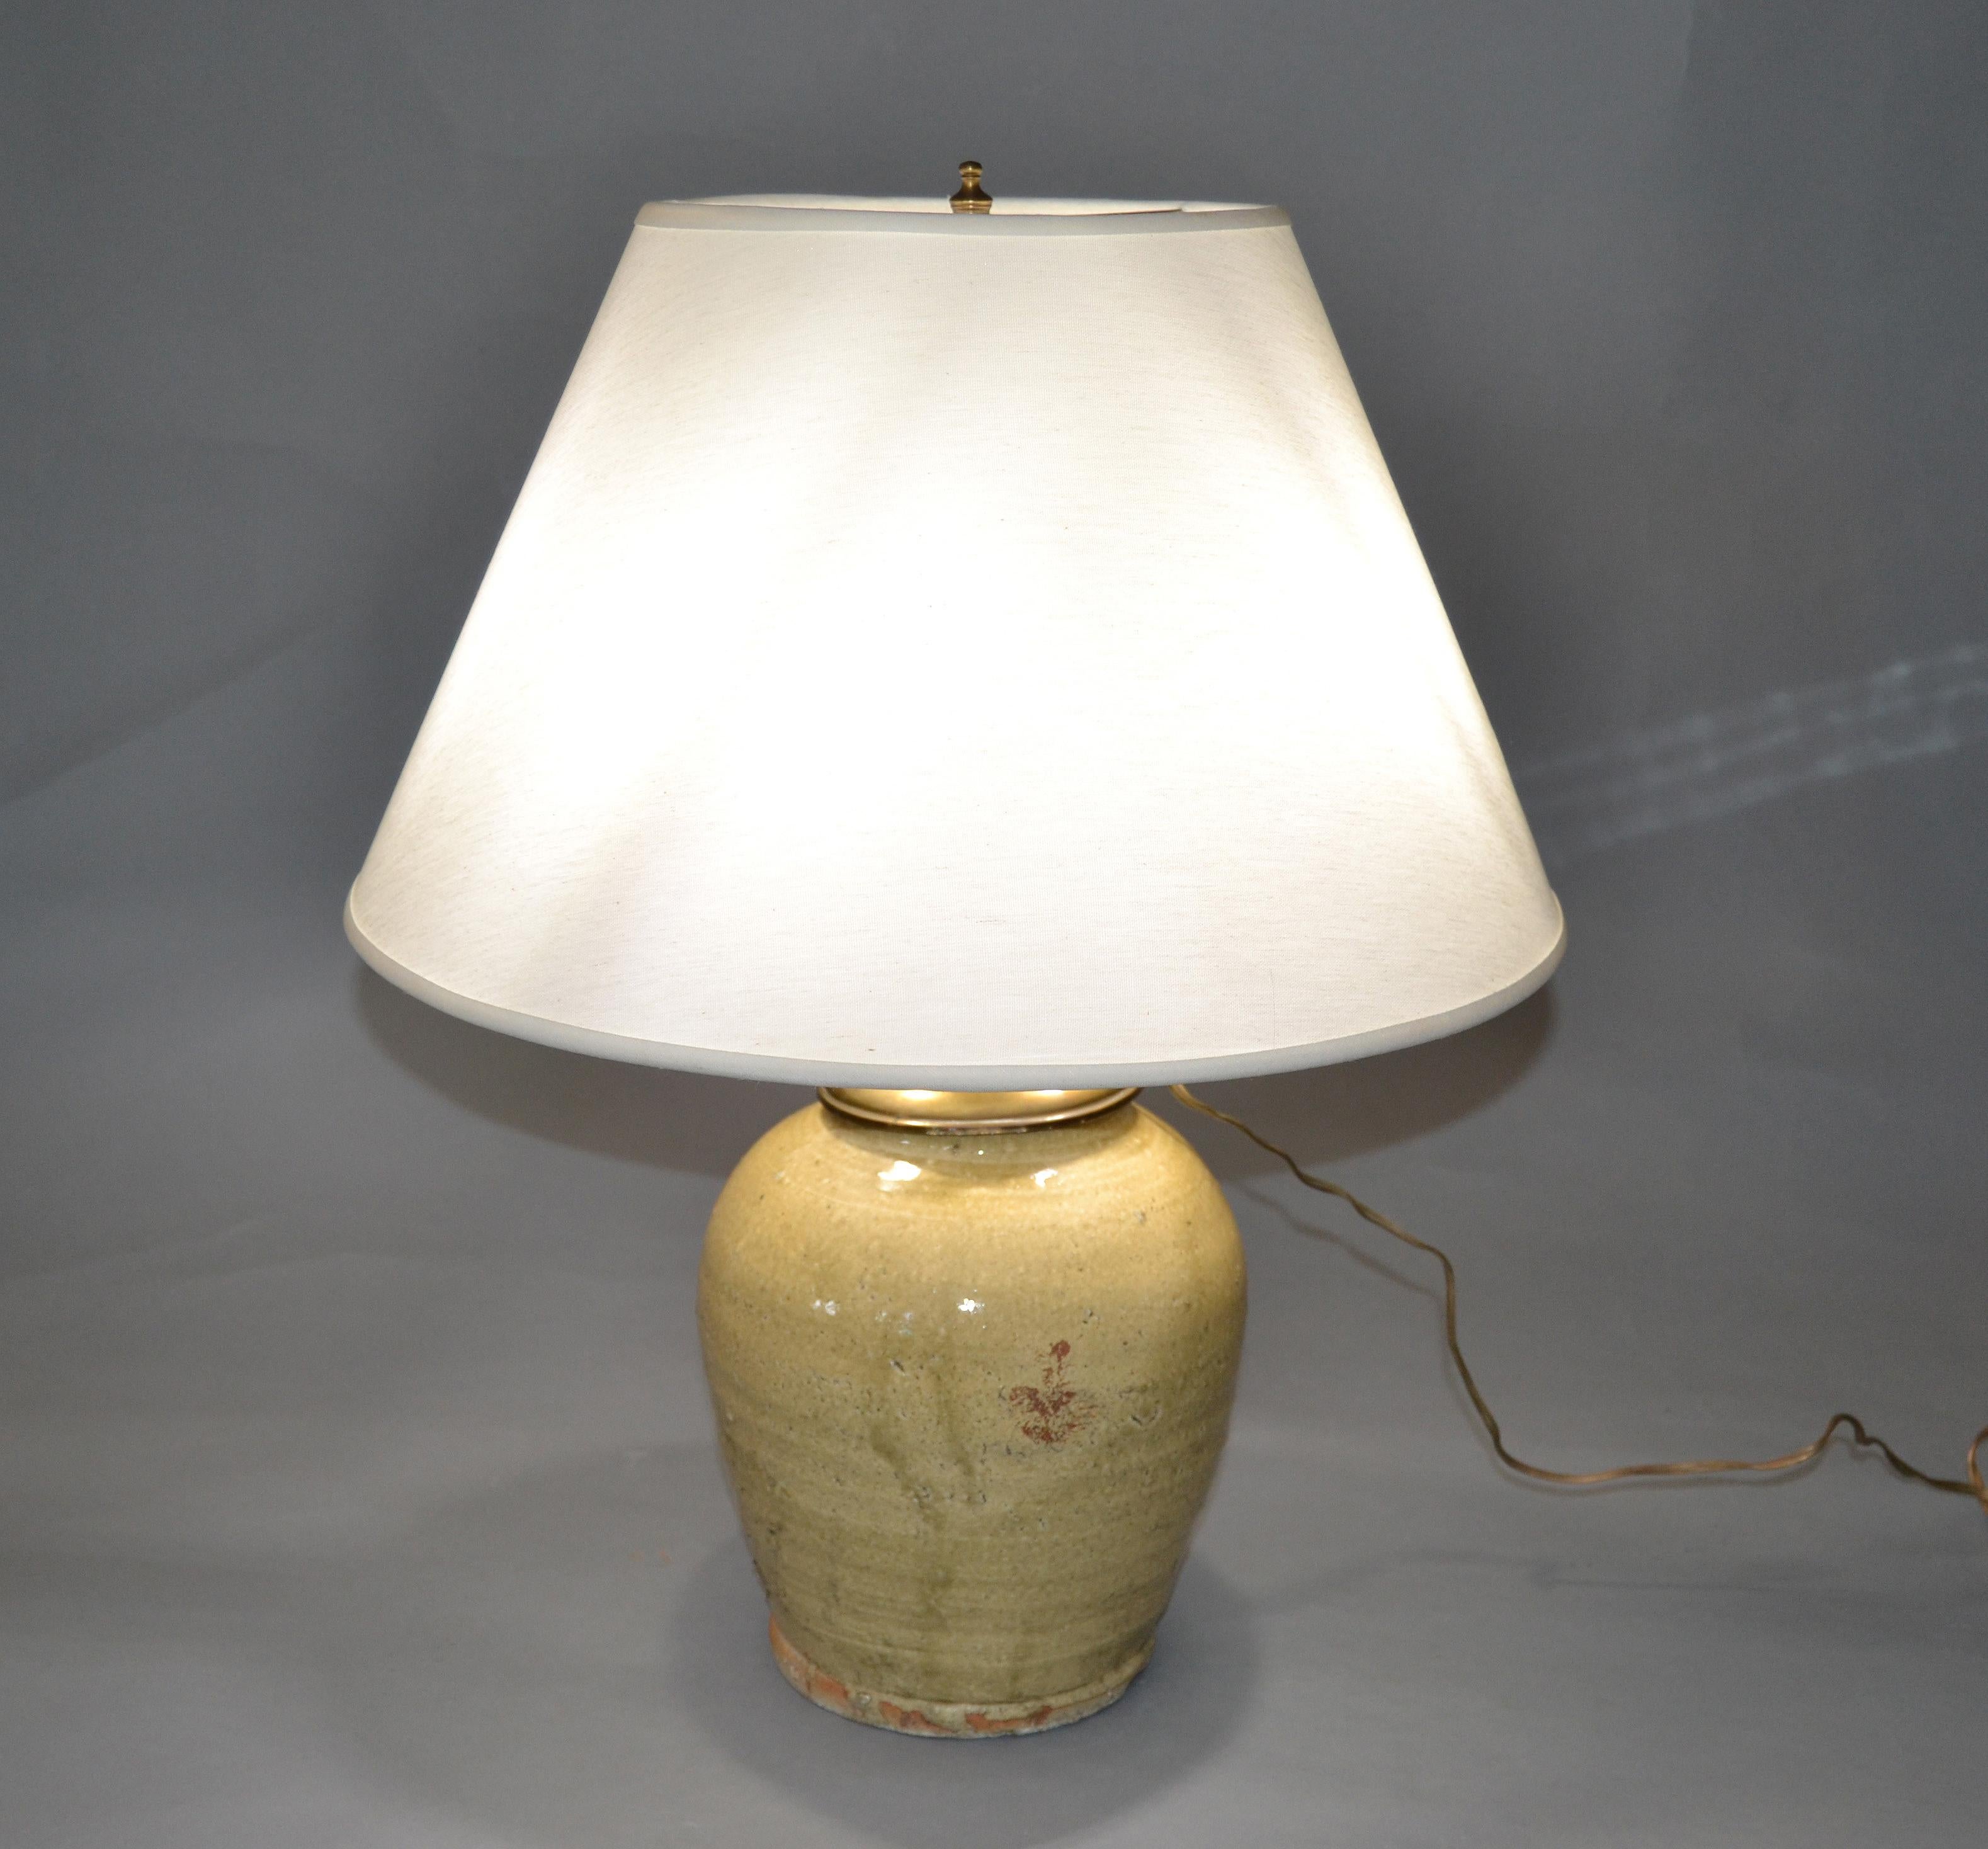 This table lamp has a glazed terracotta core and is topped with a brass shaft and double sockets.
Wiring for the US and takes two regular light bulbs with 40 watts each. 
In perfect working condition.
Note this item is handcrafted and has no felt